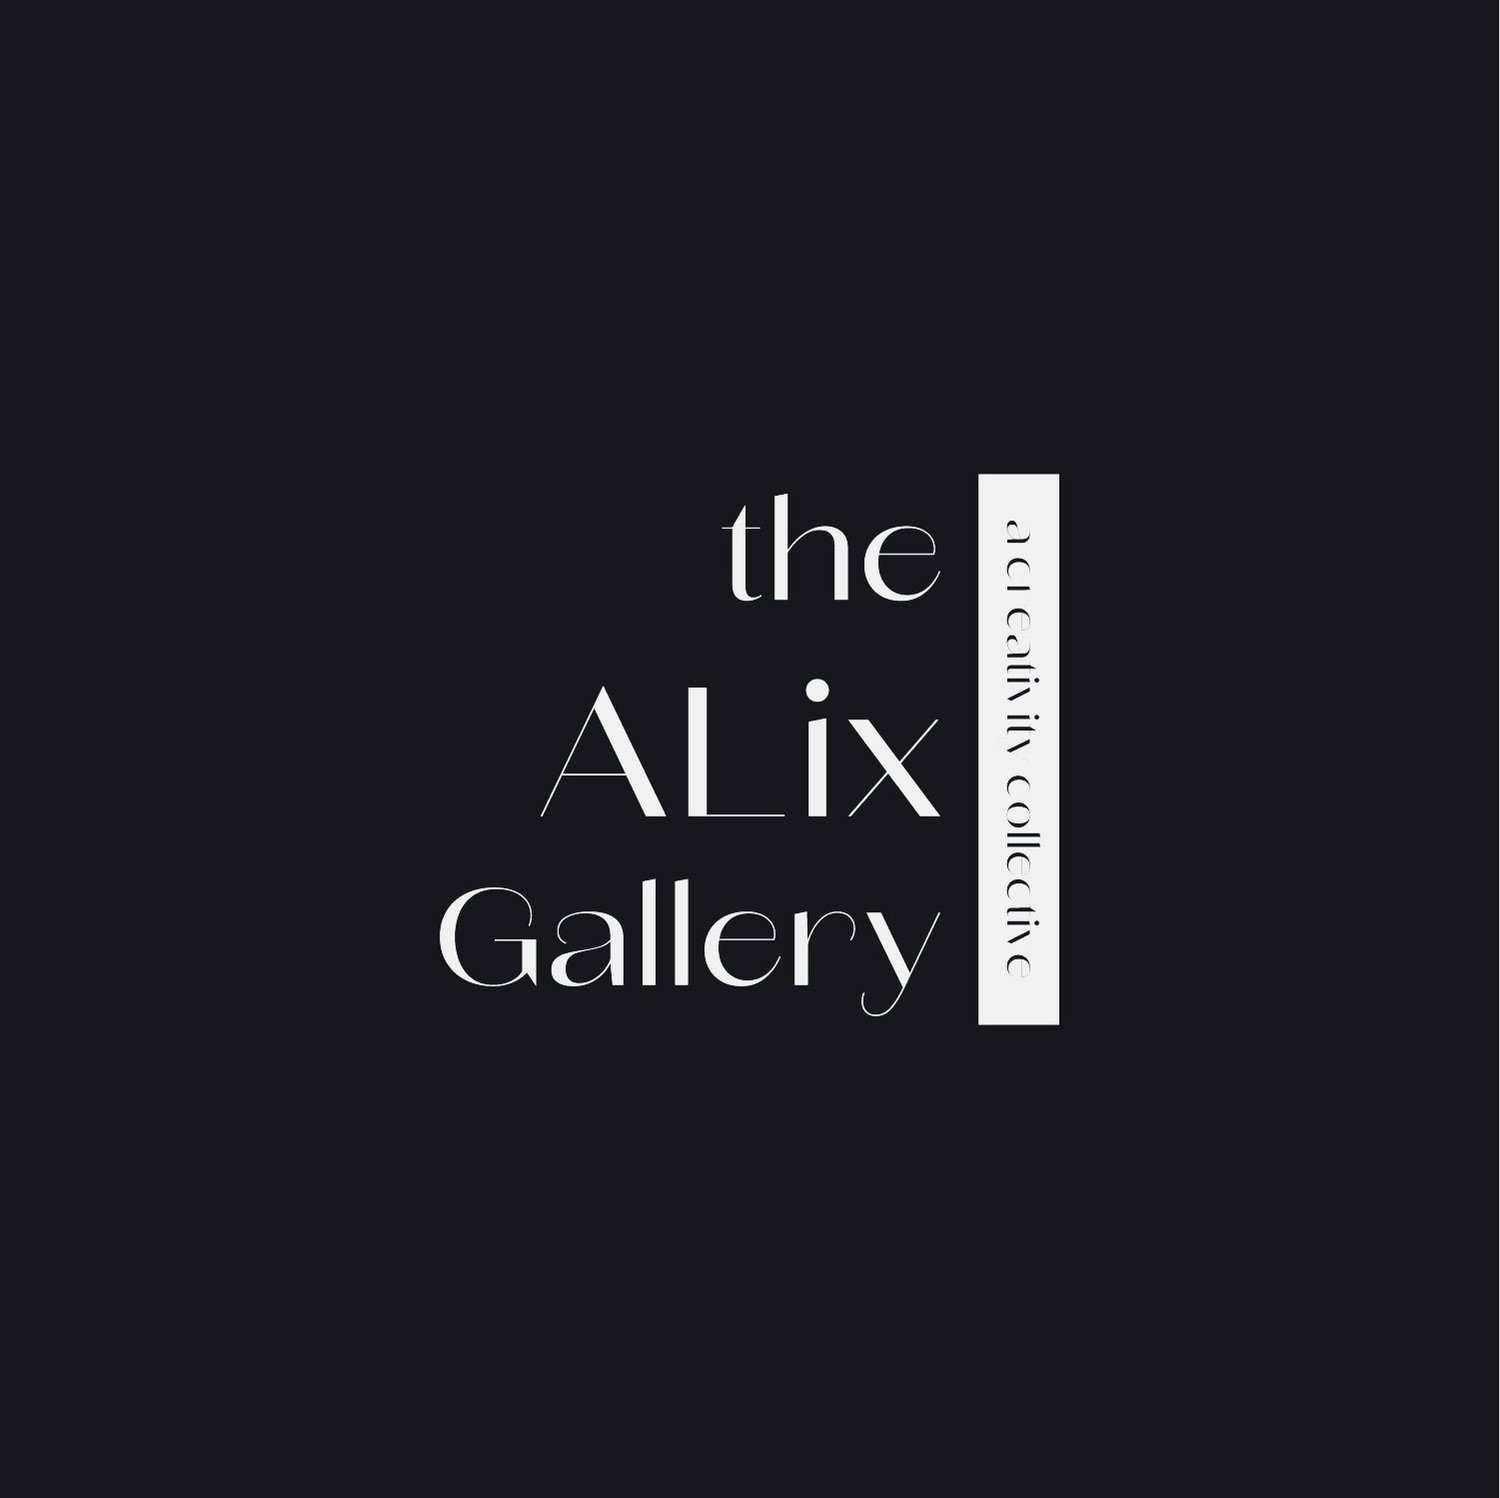 the ALIX Gallery